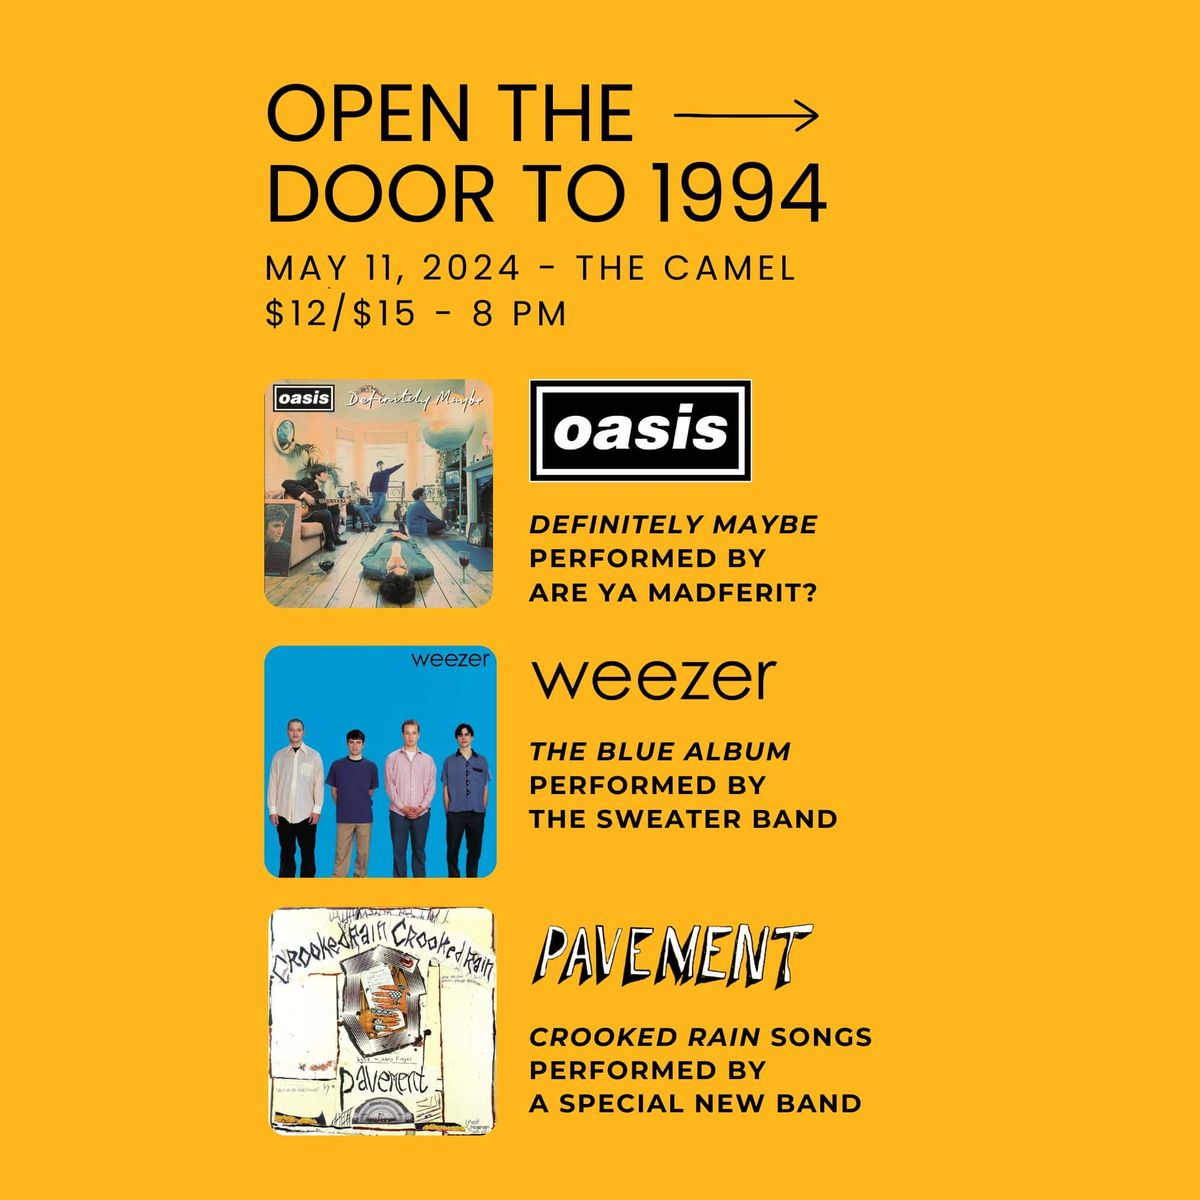 Open The Door To 1994: Are Ya Madferit(Oasis),The Sweater Band(Weezer), A Special New Band(Pavement) at The Camel 5.11